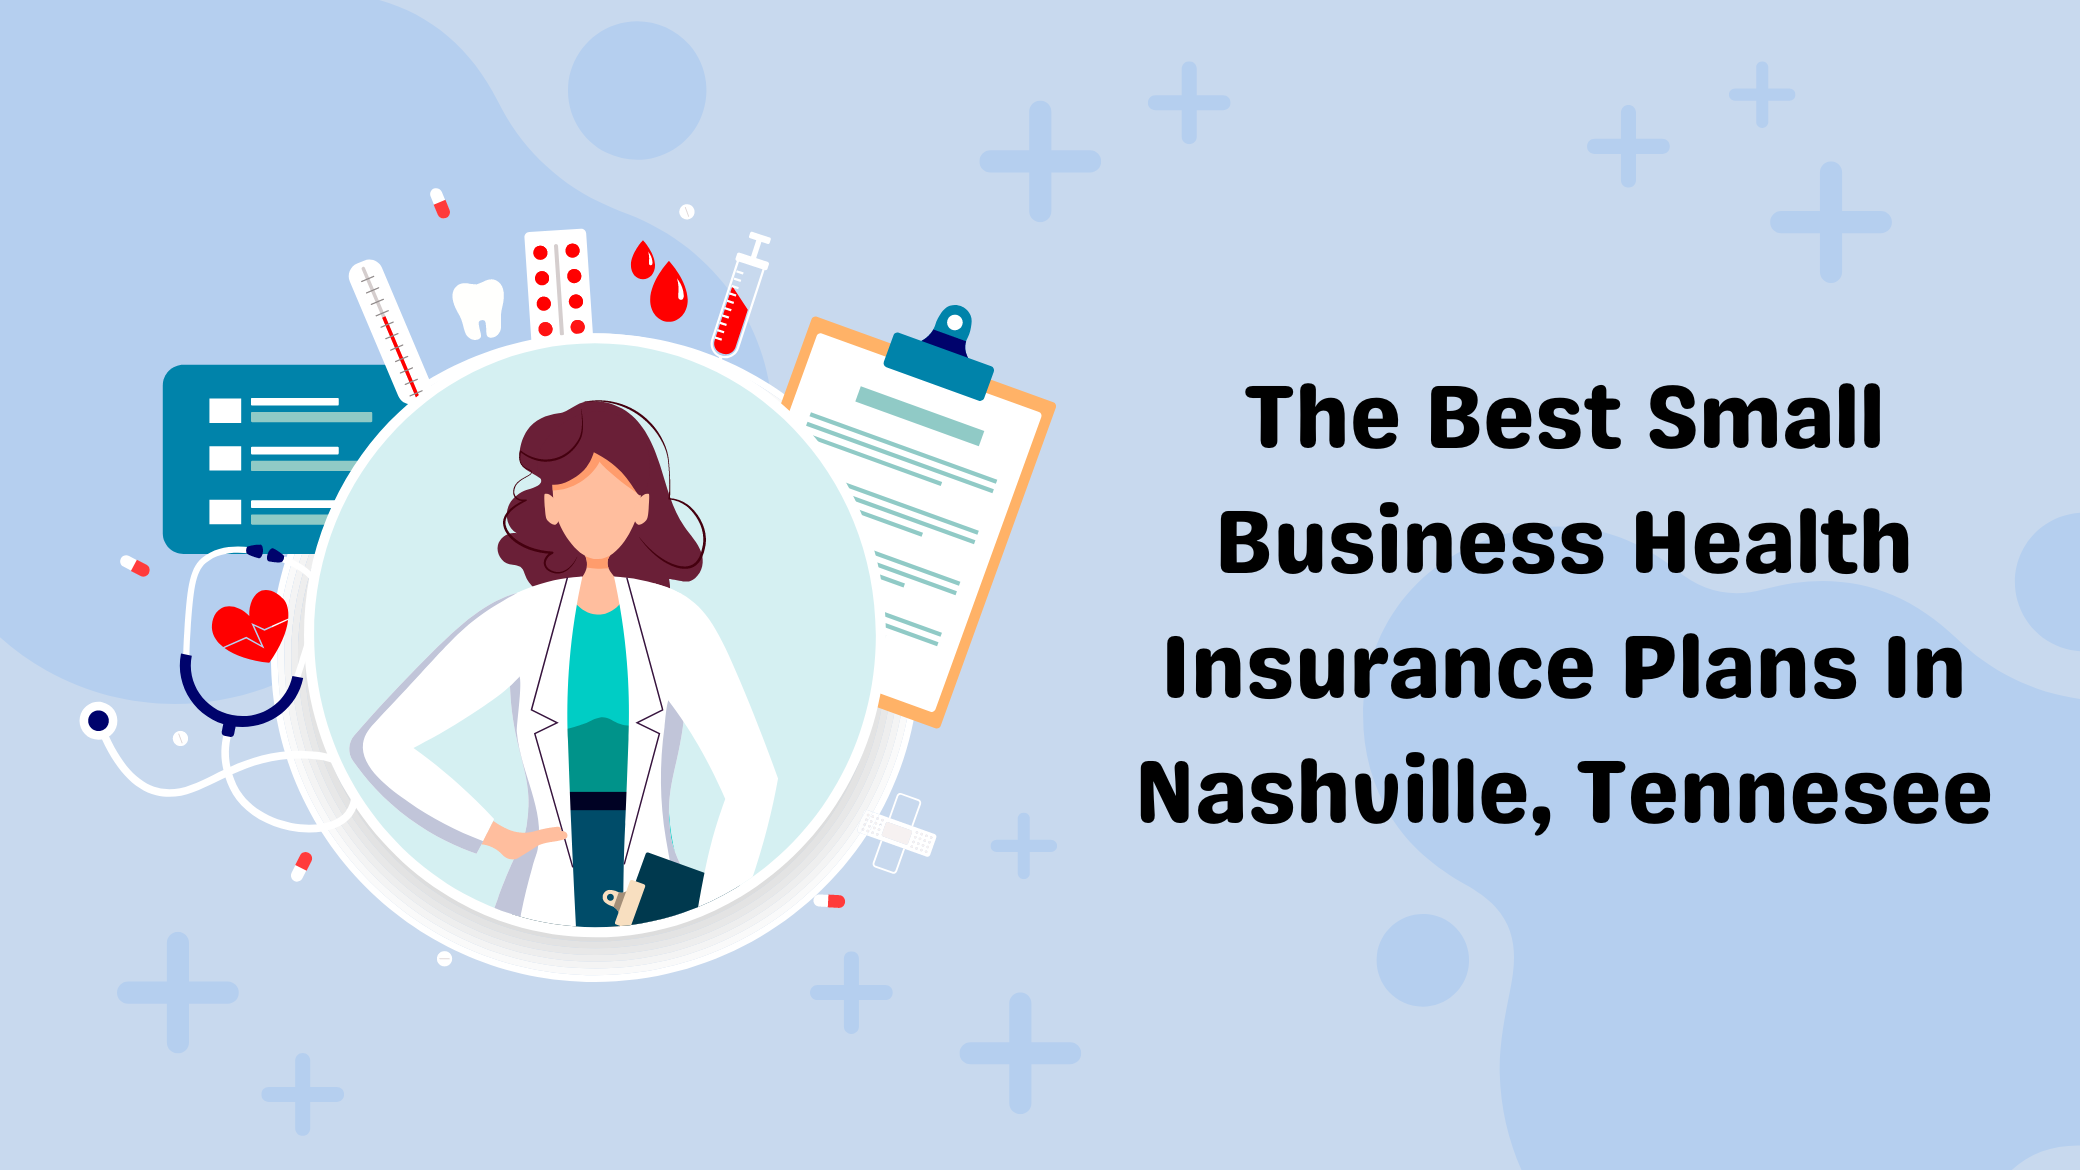 The Best Small Business Health Insurance Plans In Nashville, Tennesee